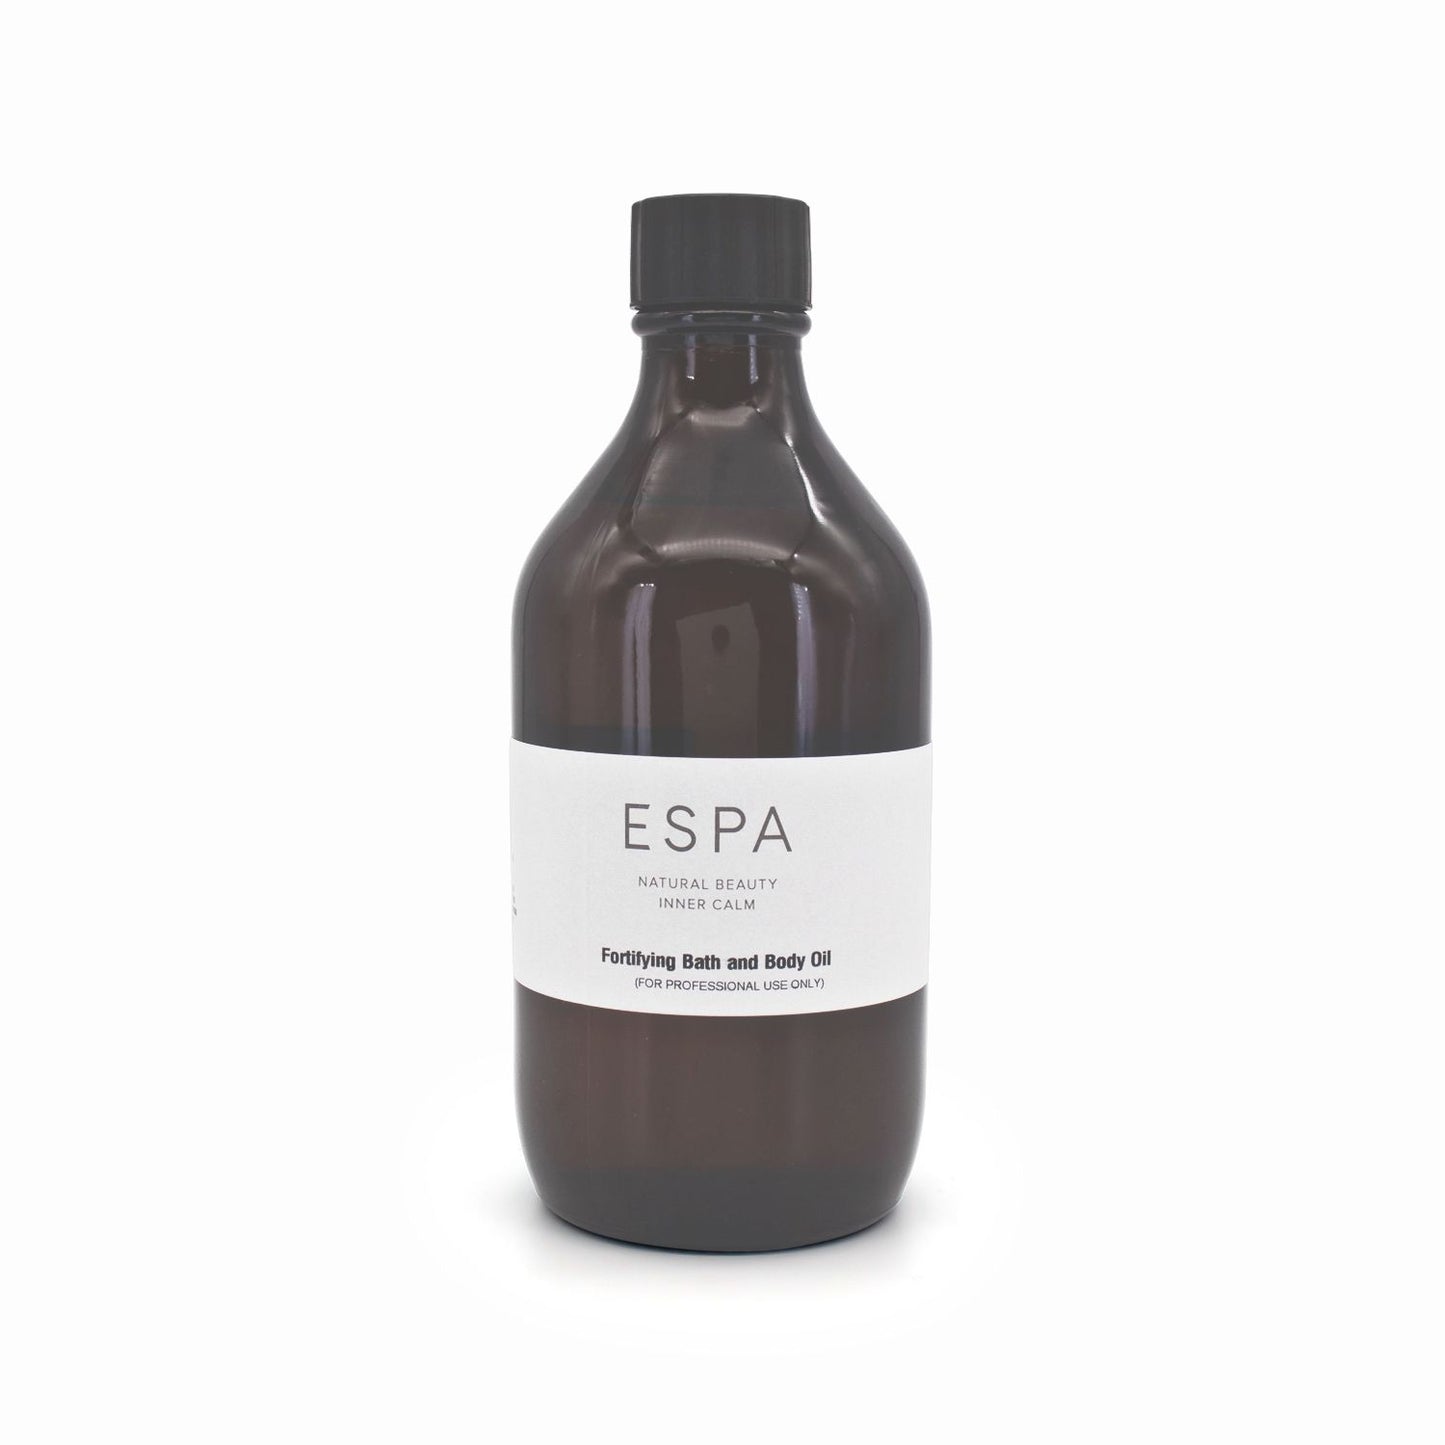 ESPA Fortifying Bath and Body Oil 500ml - Imperfect Box